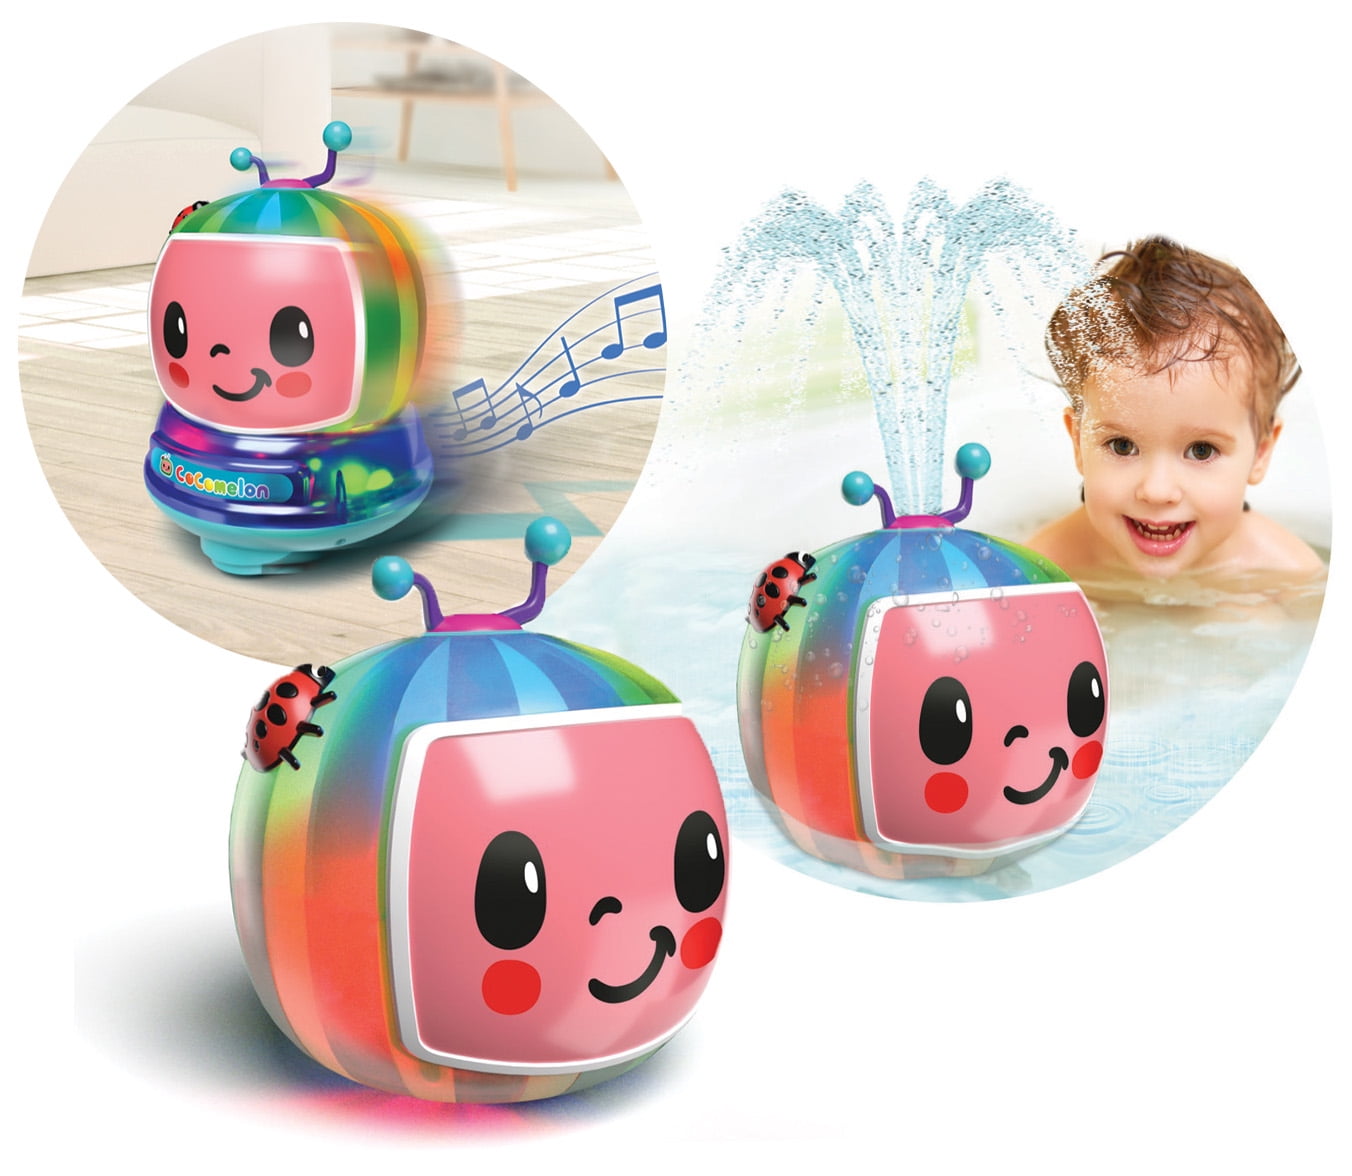 10 Best Toddler Bath Toys (All $10 or Less and So Durable!)